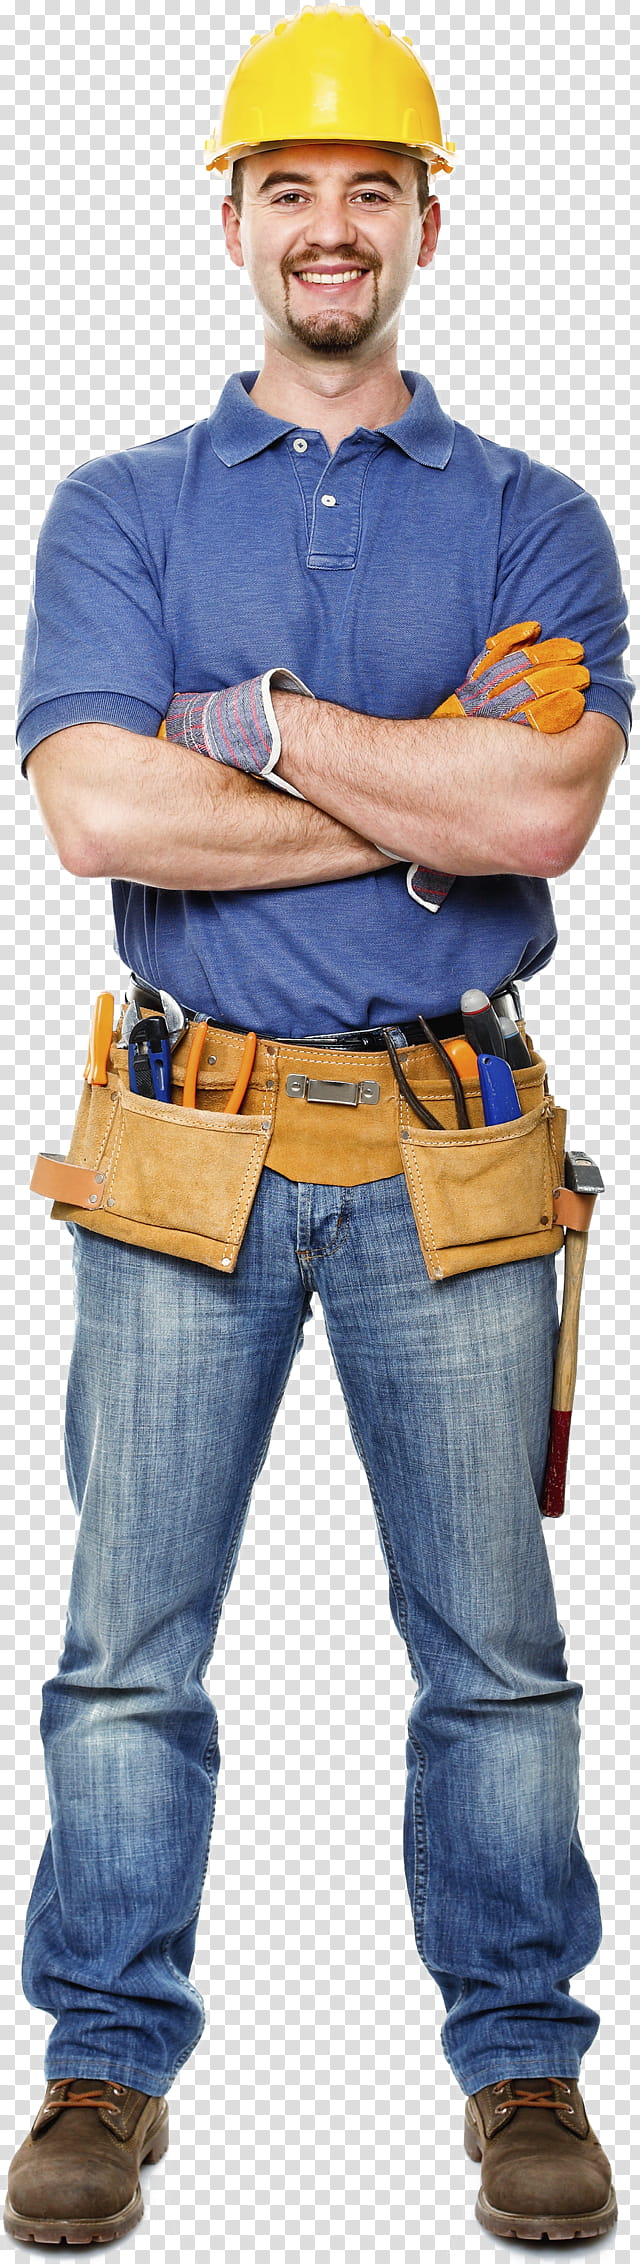 Jeans, Handyman, Plumbing, Gutters, Industry, Carpenter, Architectural Engineering, Tool transparent background PNG clipart